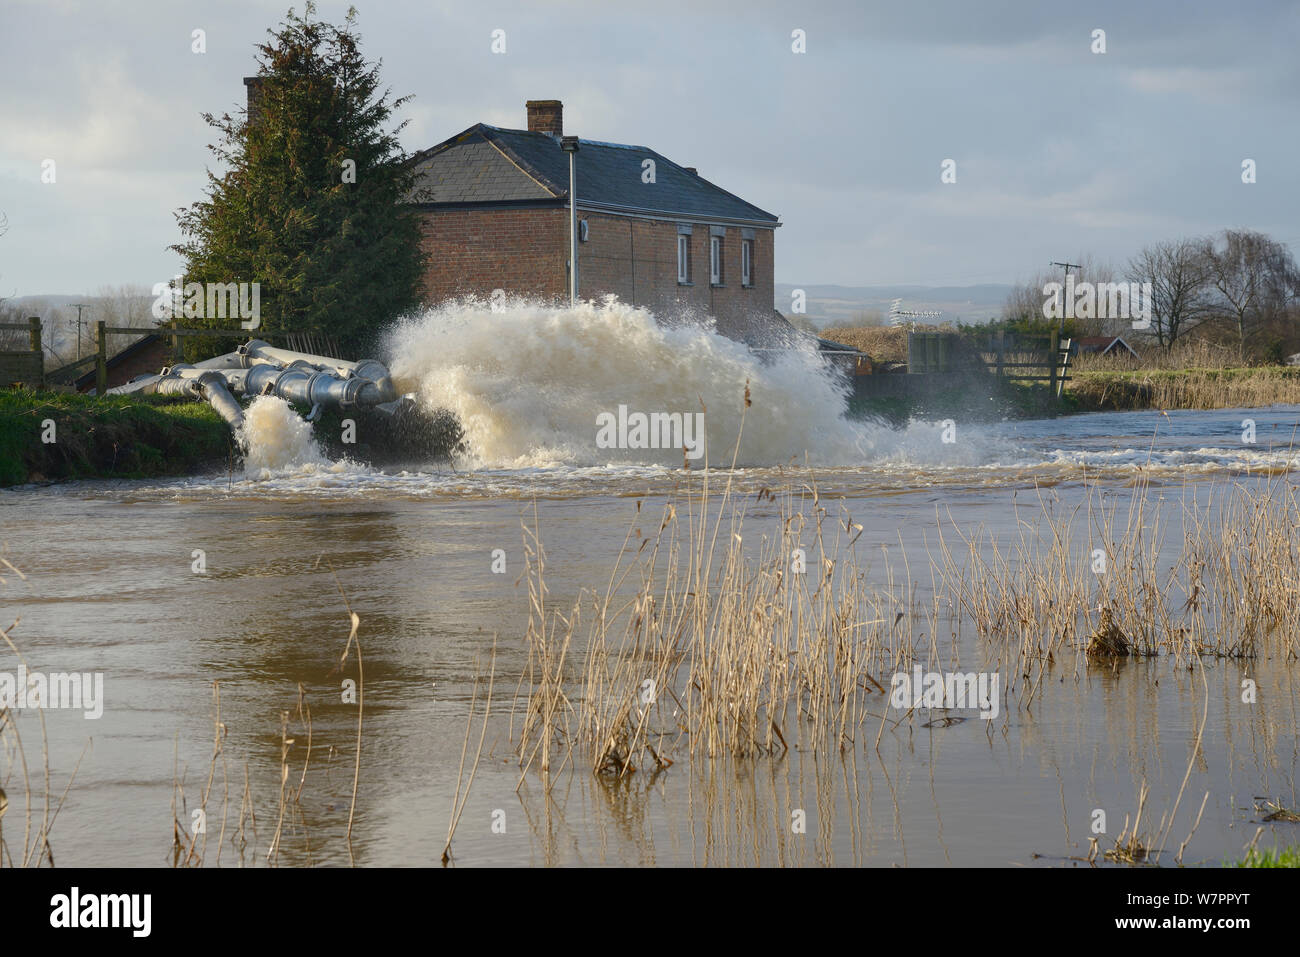 Floodwater being pumped from Lower Salt Moor into the River Parrett near Burrowbridge after weeks of heavy rain, Somerset Levels, UK, January 2013. Stock Photo